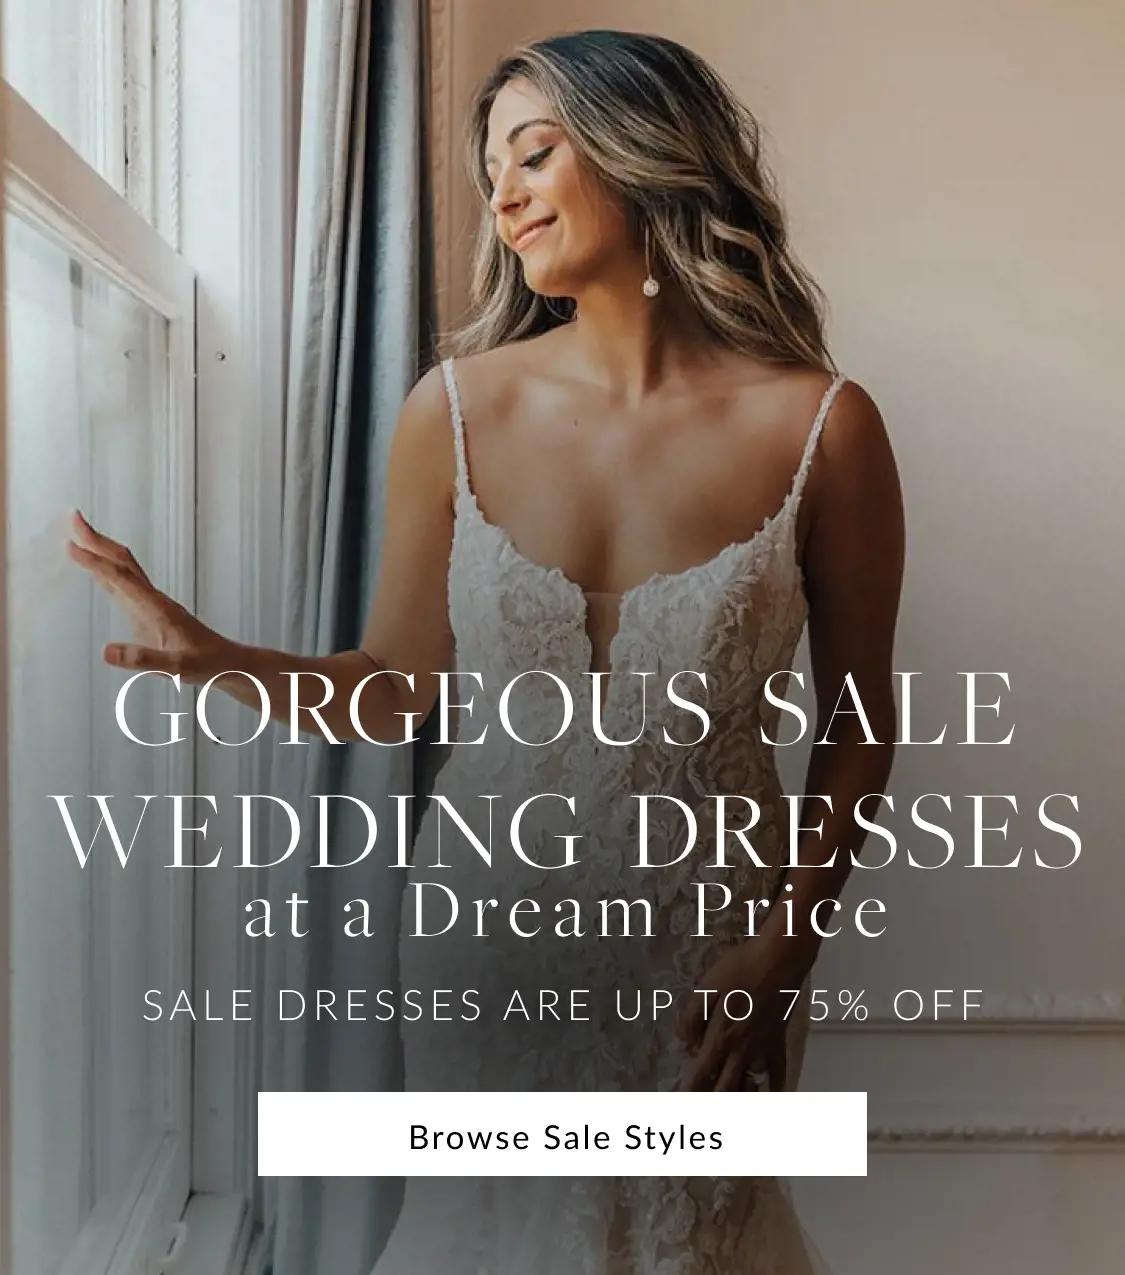 Gorgeous Sale Wedding Dresses at a Dream Price at Isabella Grace in UK